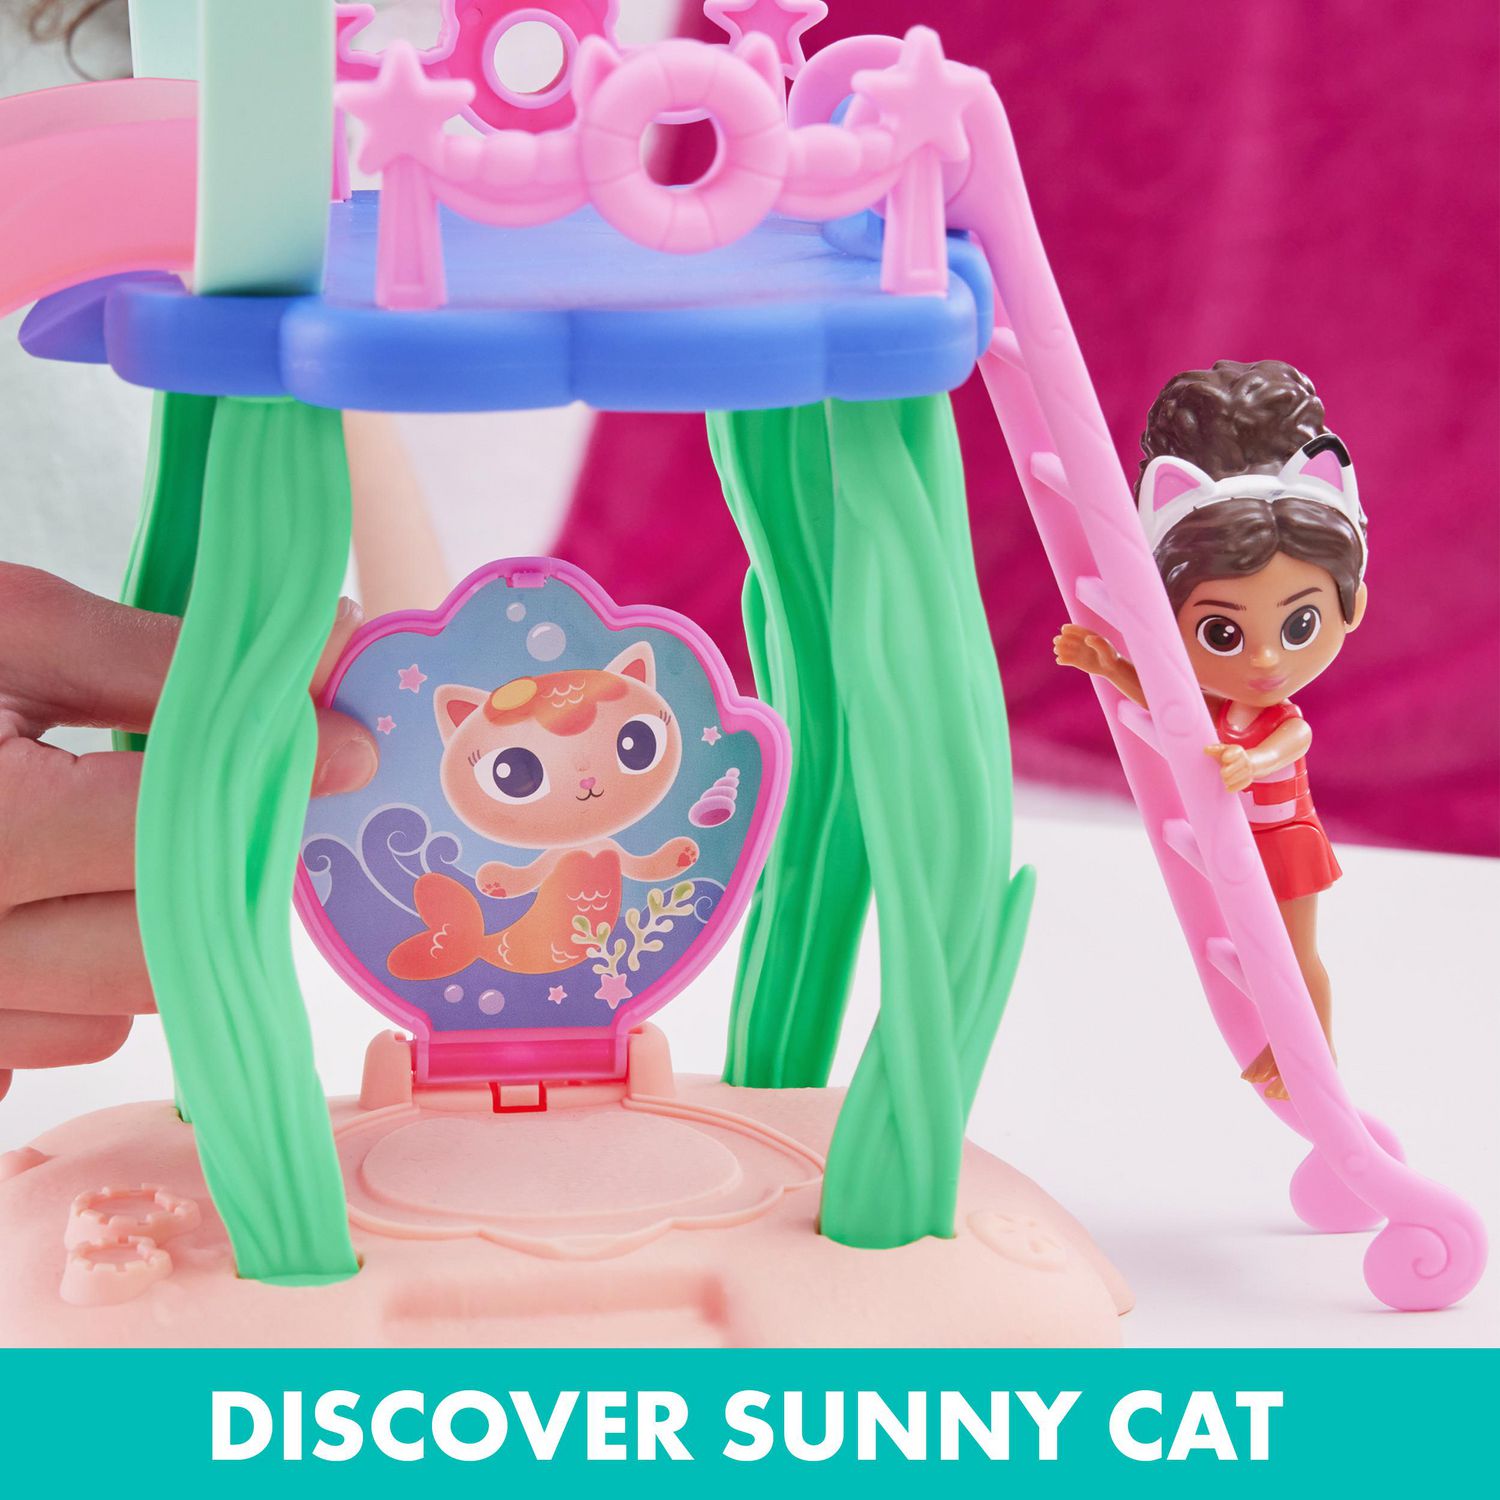 Gabby's Dollhouse, Purr-ific Pool Playset with Gabby and MerCat